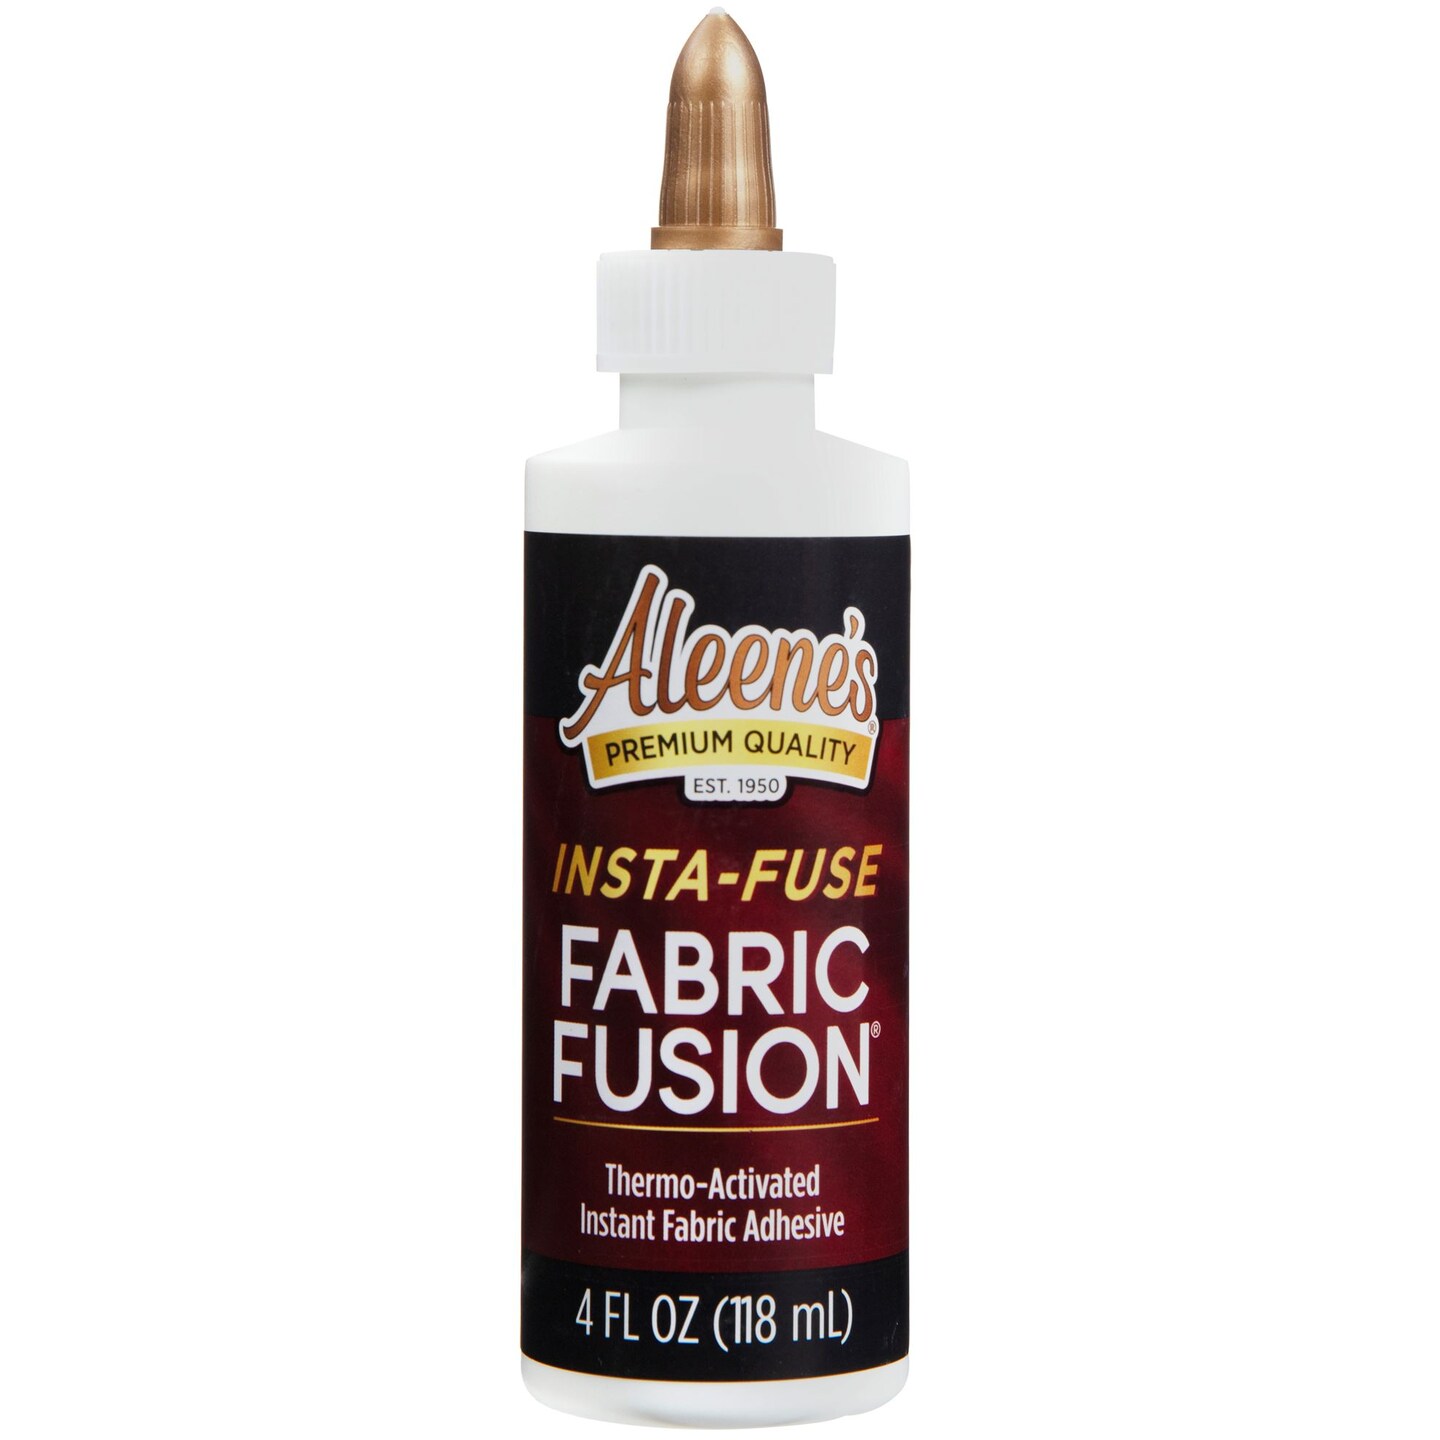 Fabric Fusion Fabric Glue Permanent Clear Washable 2oz for Patches, Rug Glue, Clothing Glue, No Sew Fabric Glue with Pixiss Art Dotting Stylus Pens 5